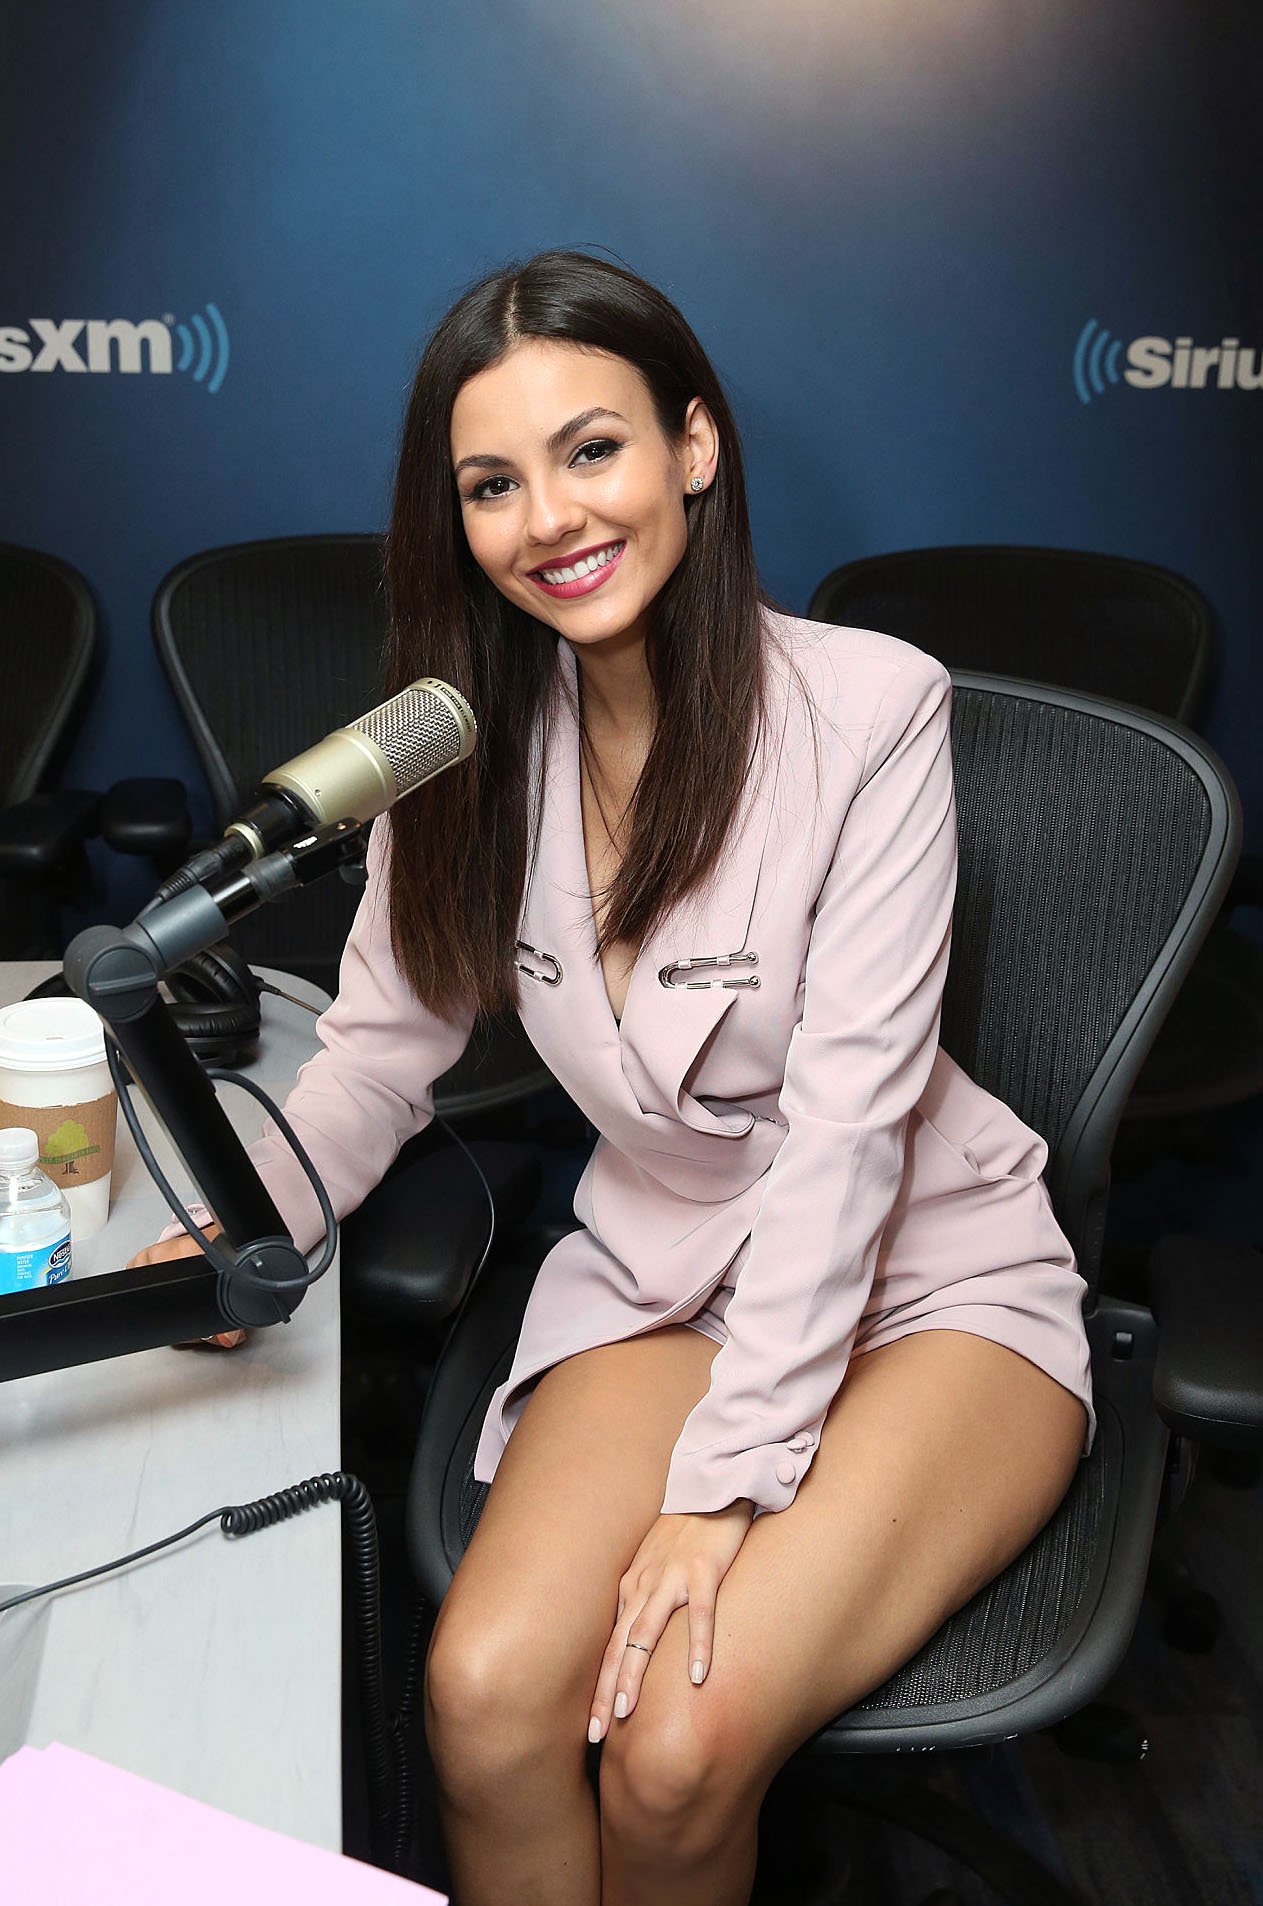  Happy birthday lovely girl!!  Victoria Justice has beautiful legs!! 